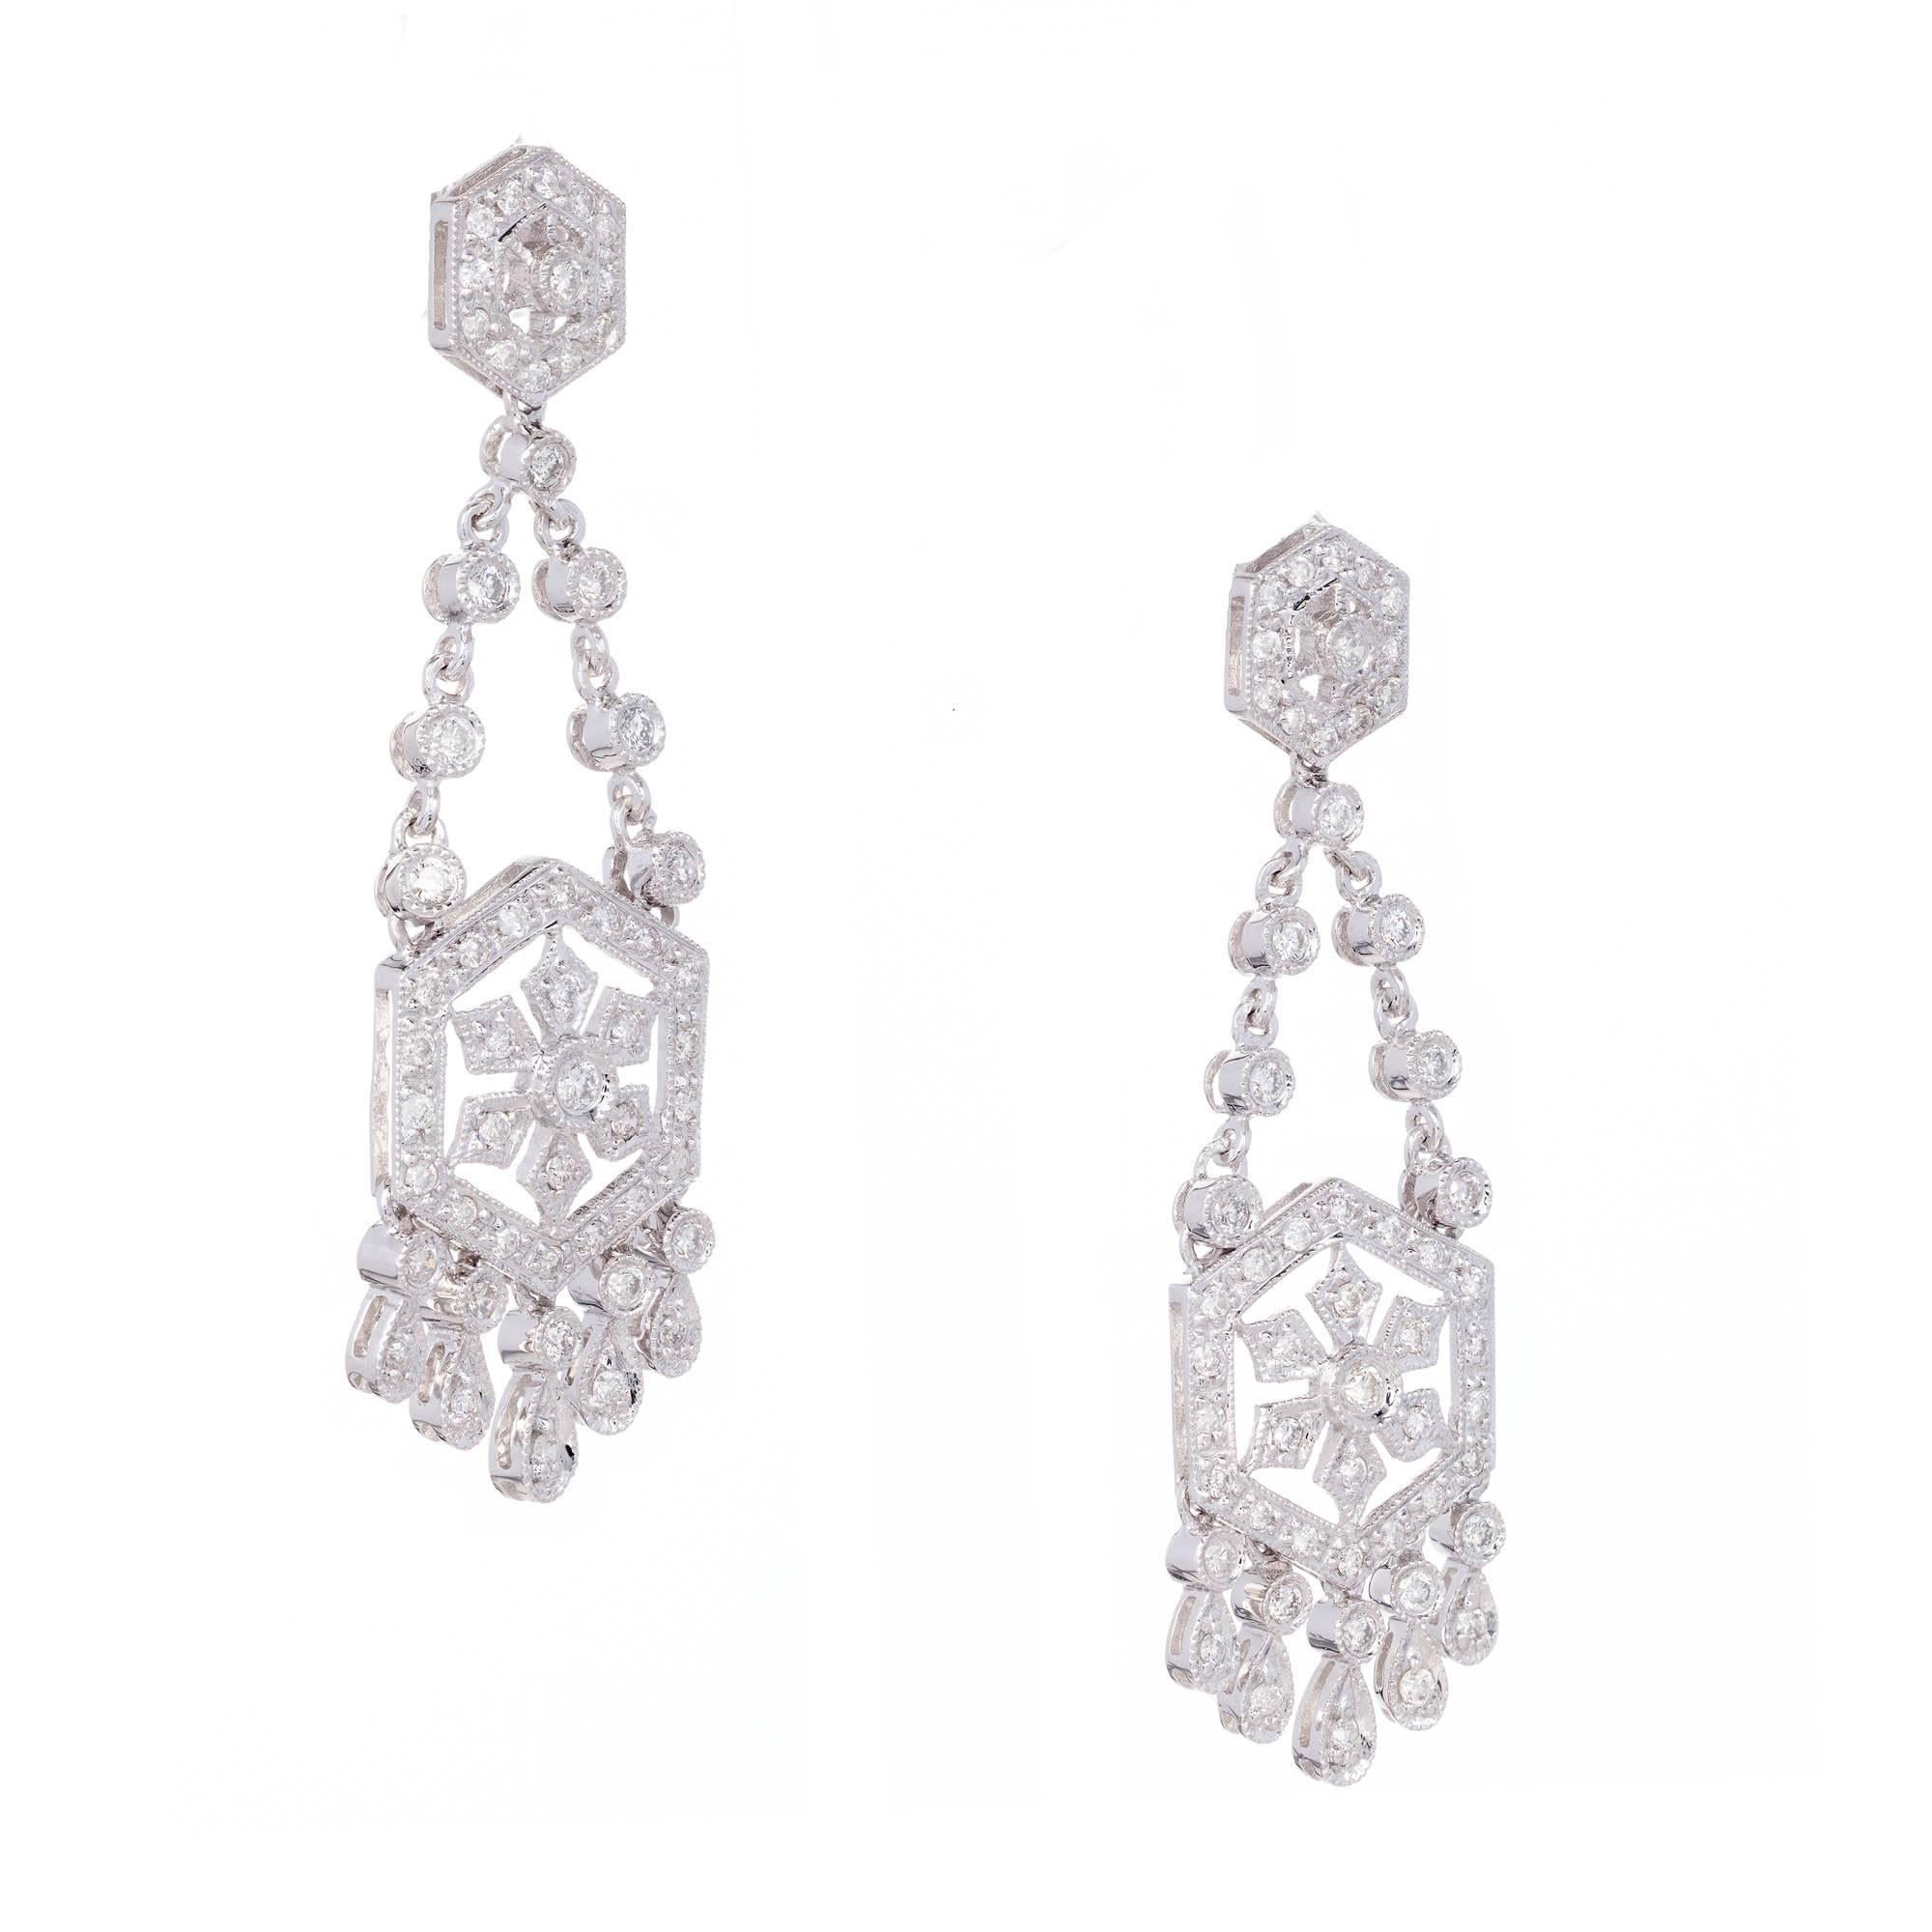 Chandelier style full cut Diamond dangle earrings in 18k white gold.

119 round full cut Diamonds, approx. total weight 1.25cts, H, SI1
18k white gold
Stamped: 750
7.4 grams
Top to bottom: 44.96mm or 1.77 inches
Width: 12.65mm or .5 inch
Depth: